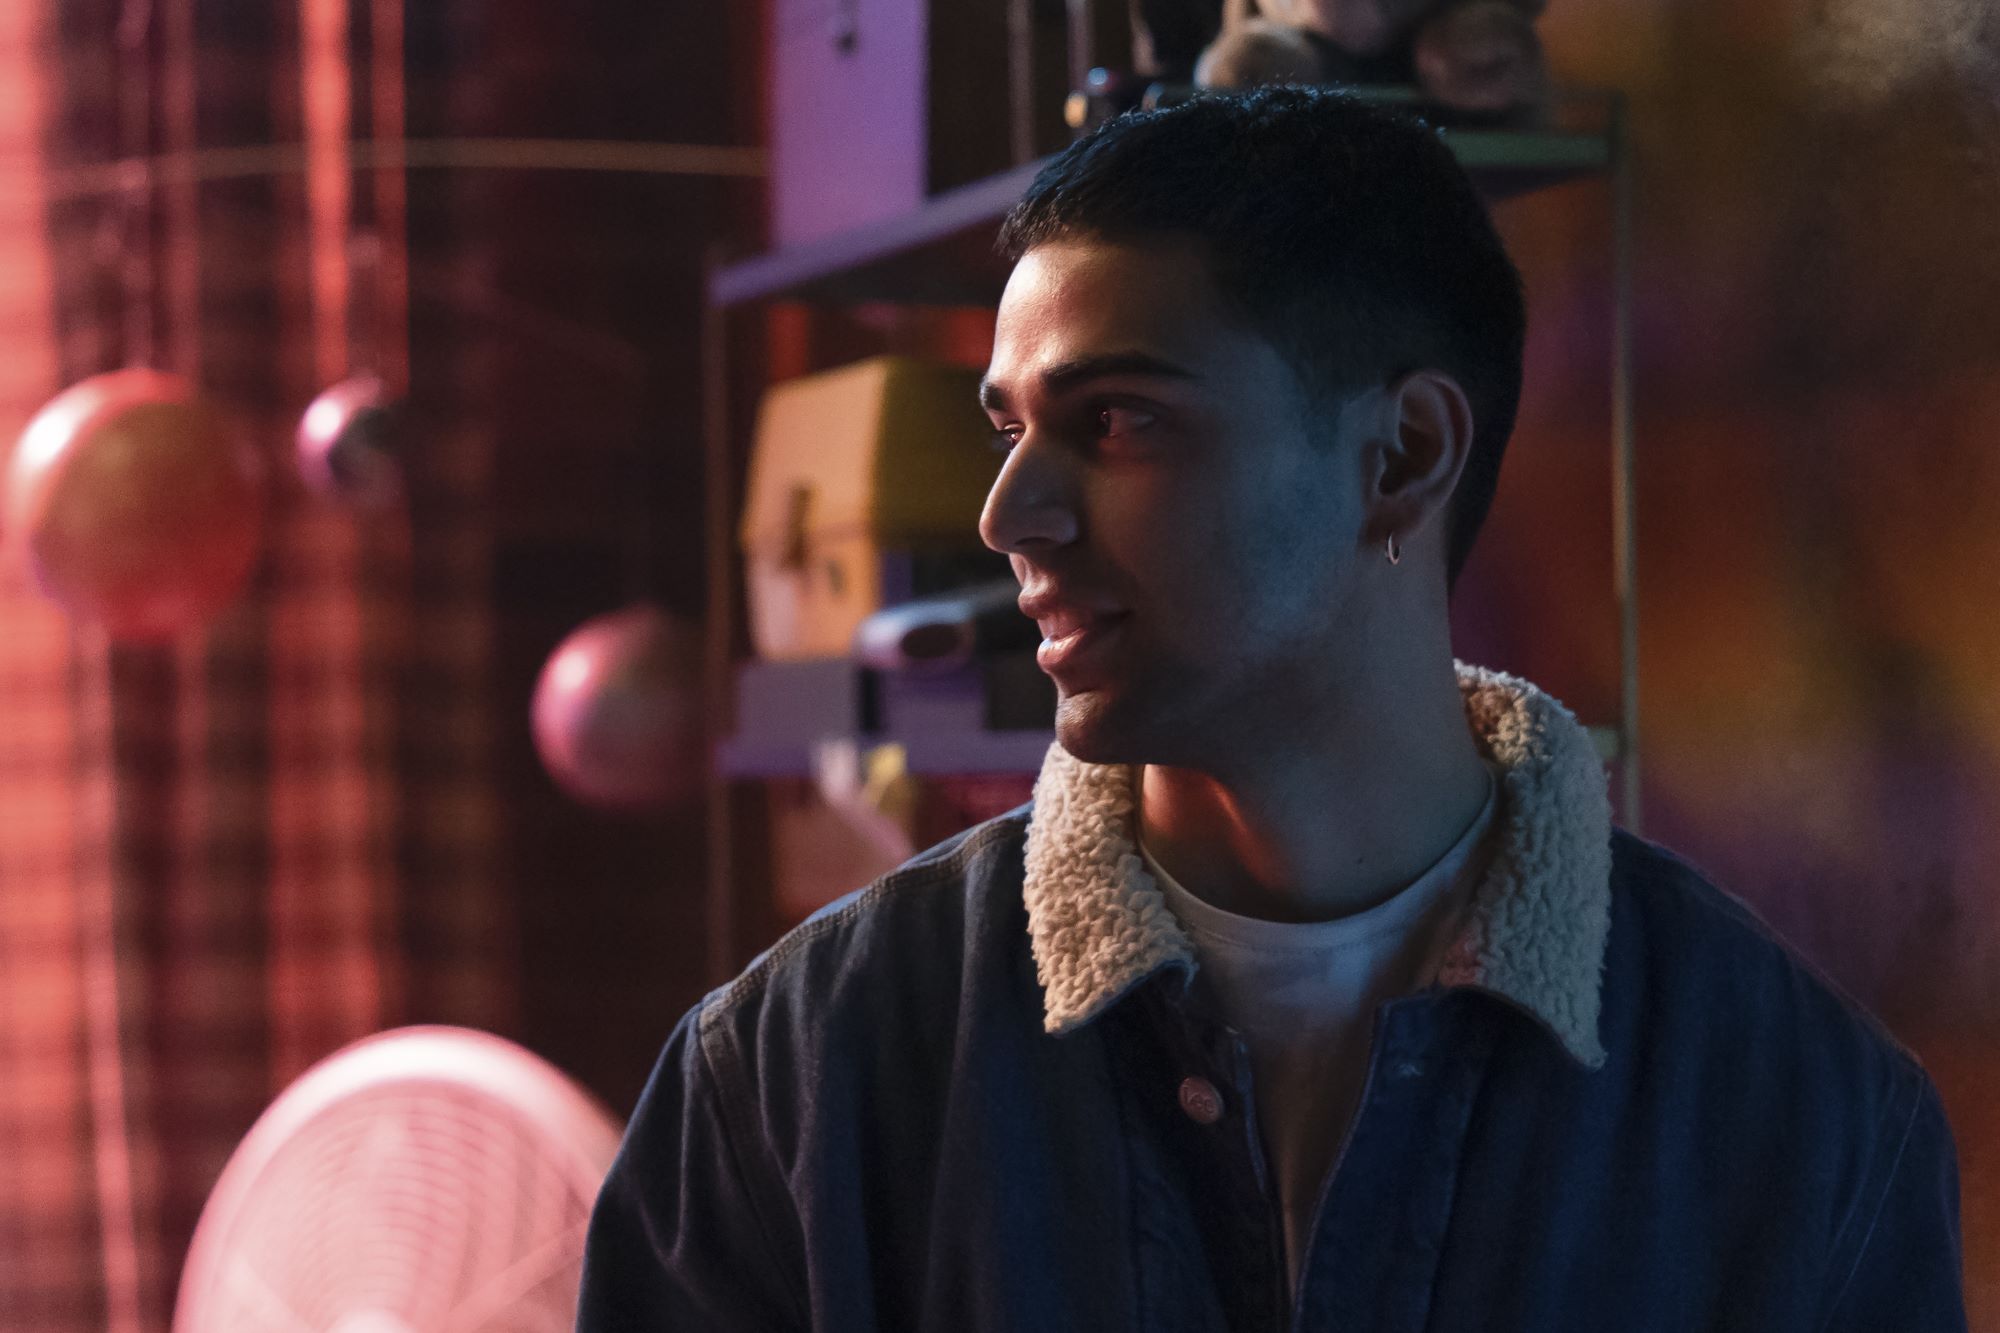 Rish Shah, in character as Kamran in 'Ms. Marvel' Episode 4, wears a jean jacket with a sherpa-lined collar over a white shirt.